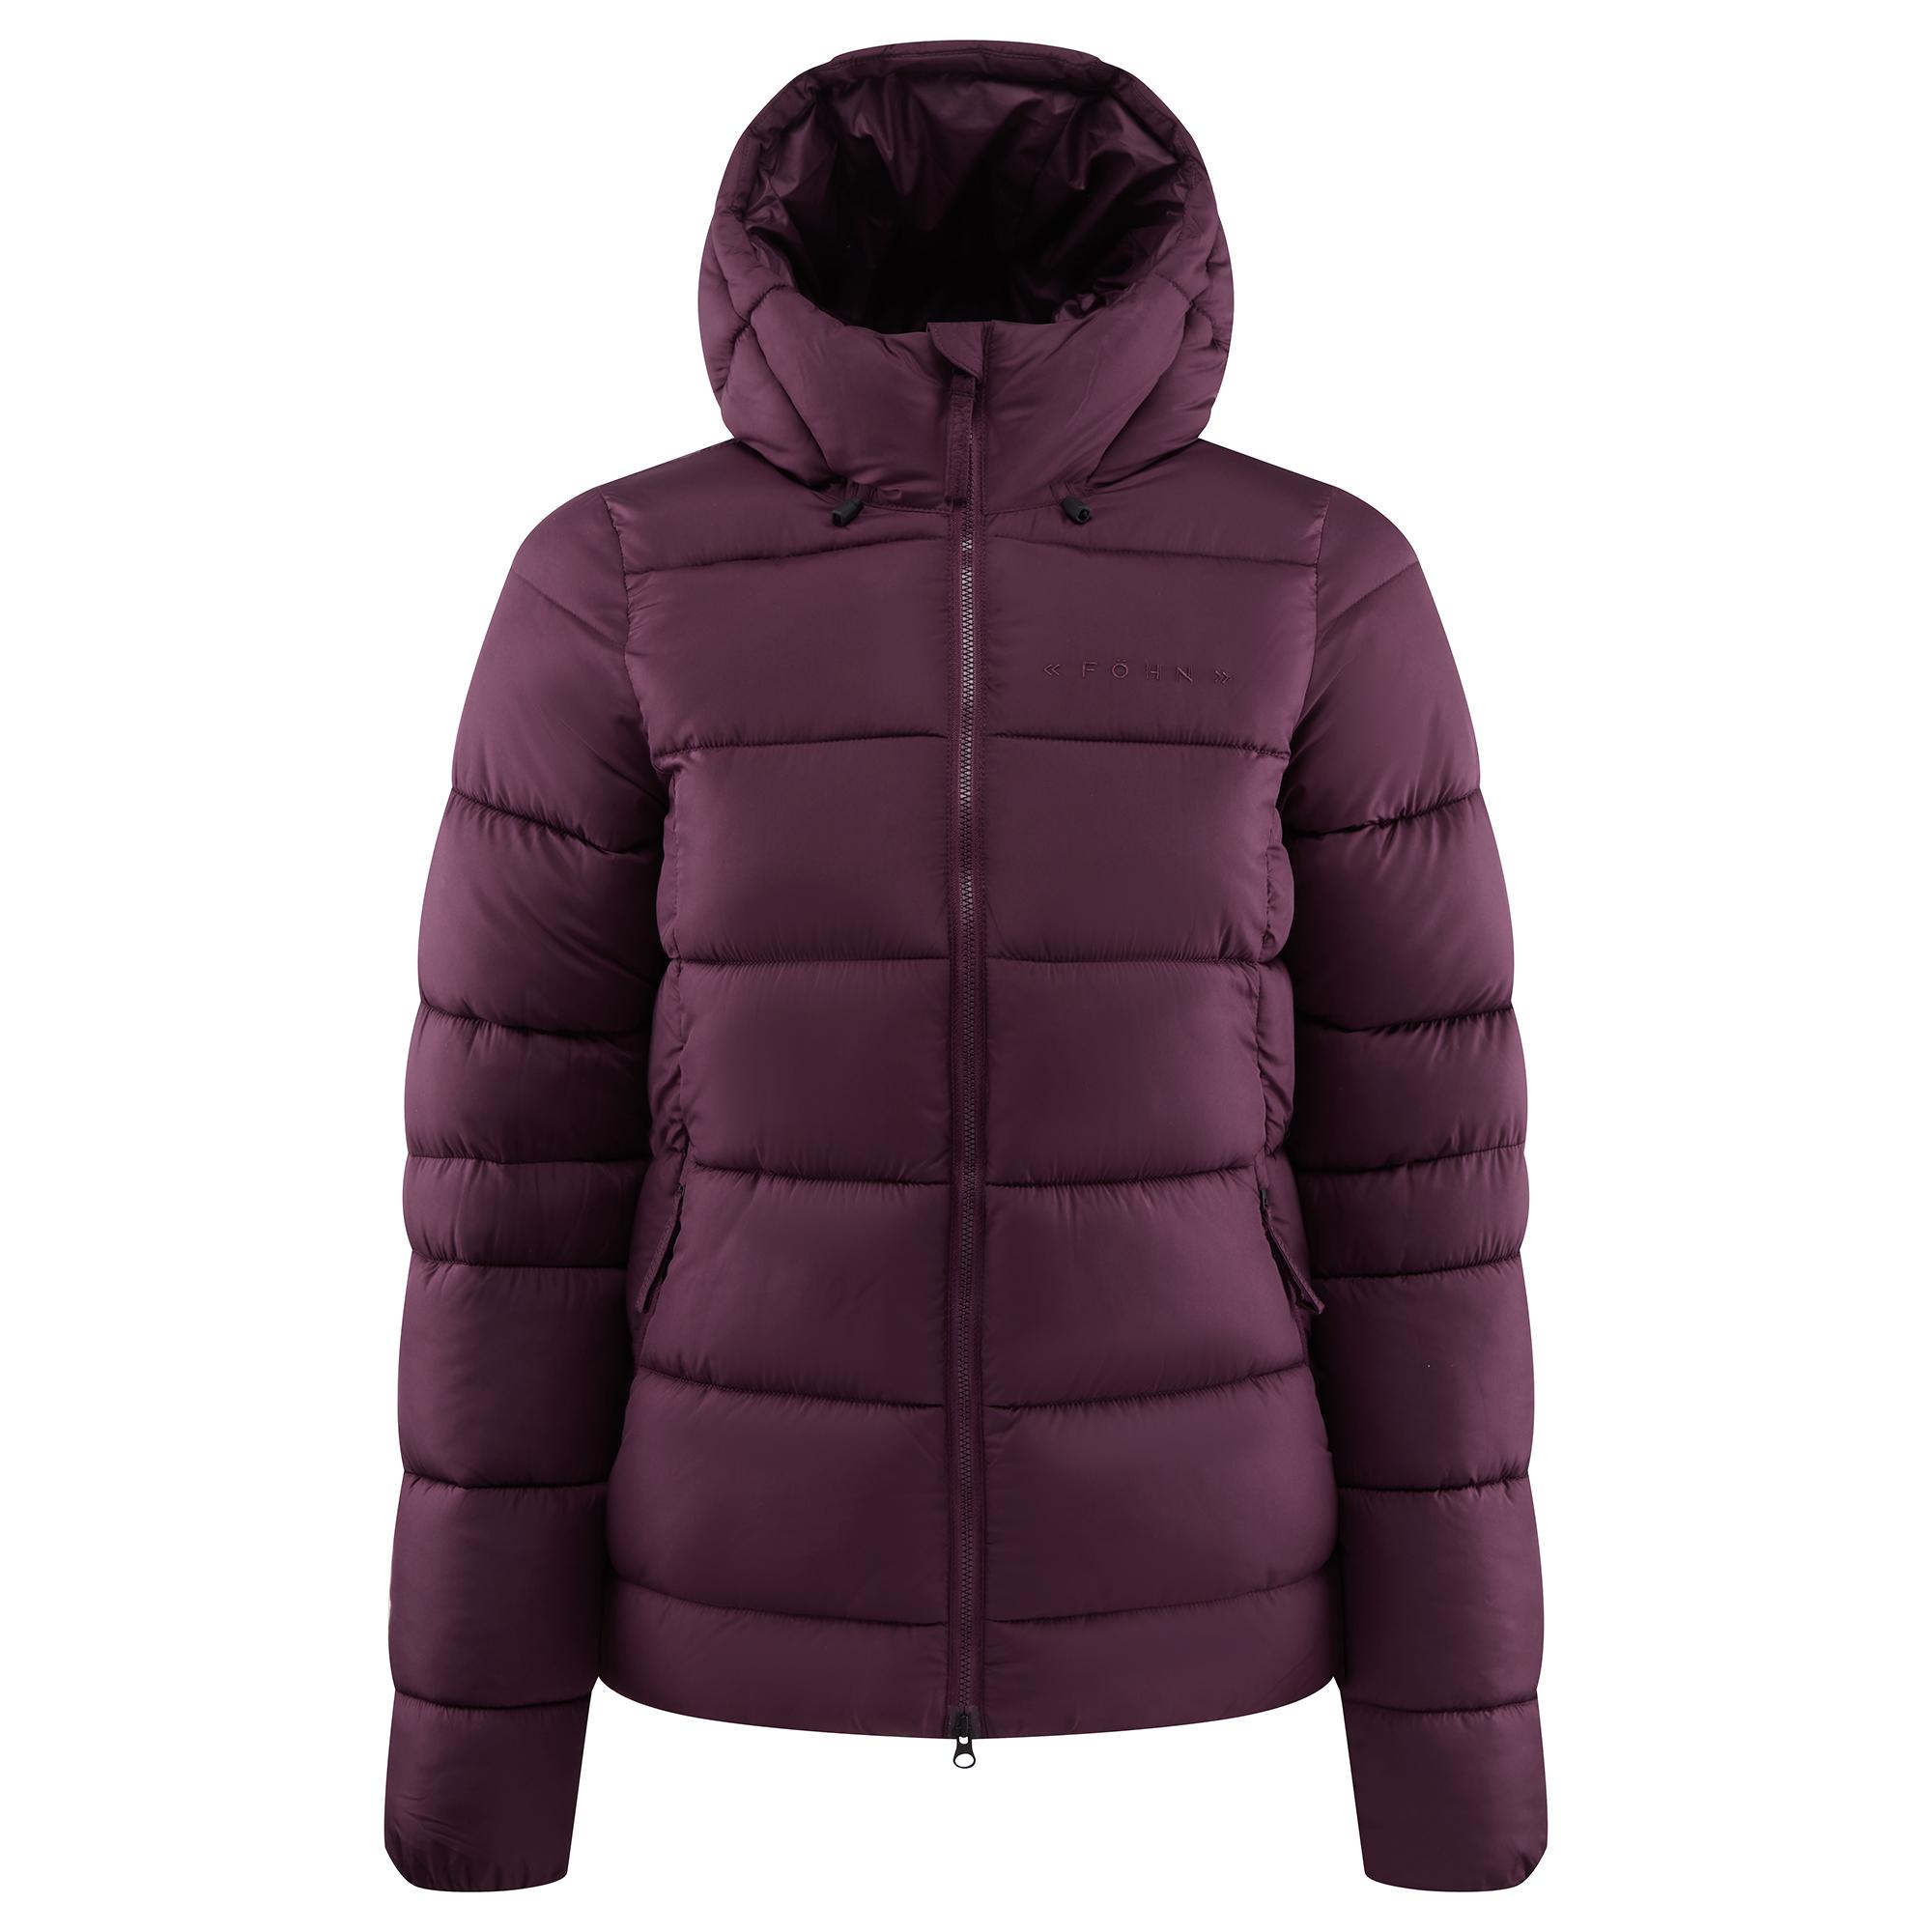 Fhn Womens Macro Synthetic Down Jacket - Potent Purple